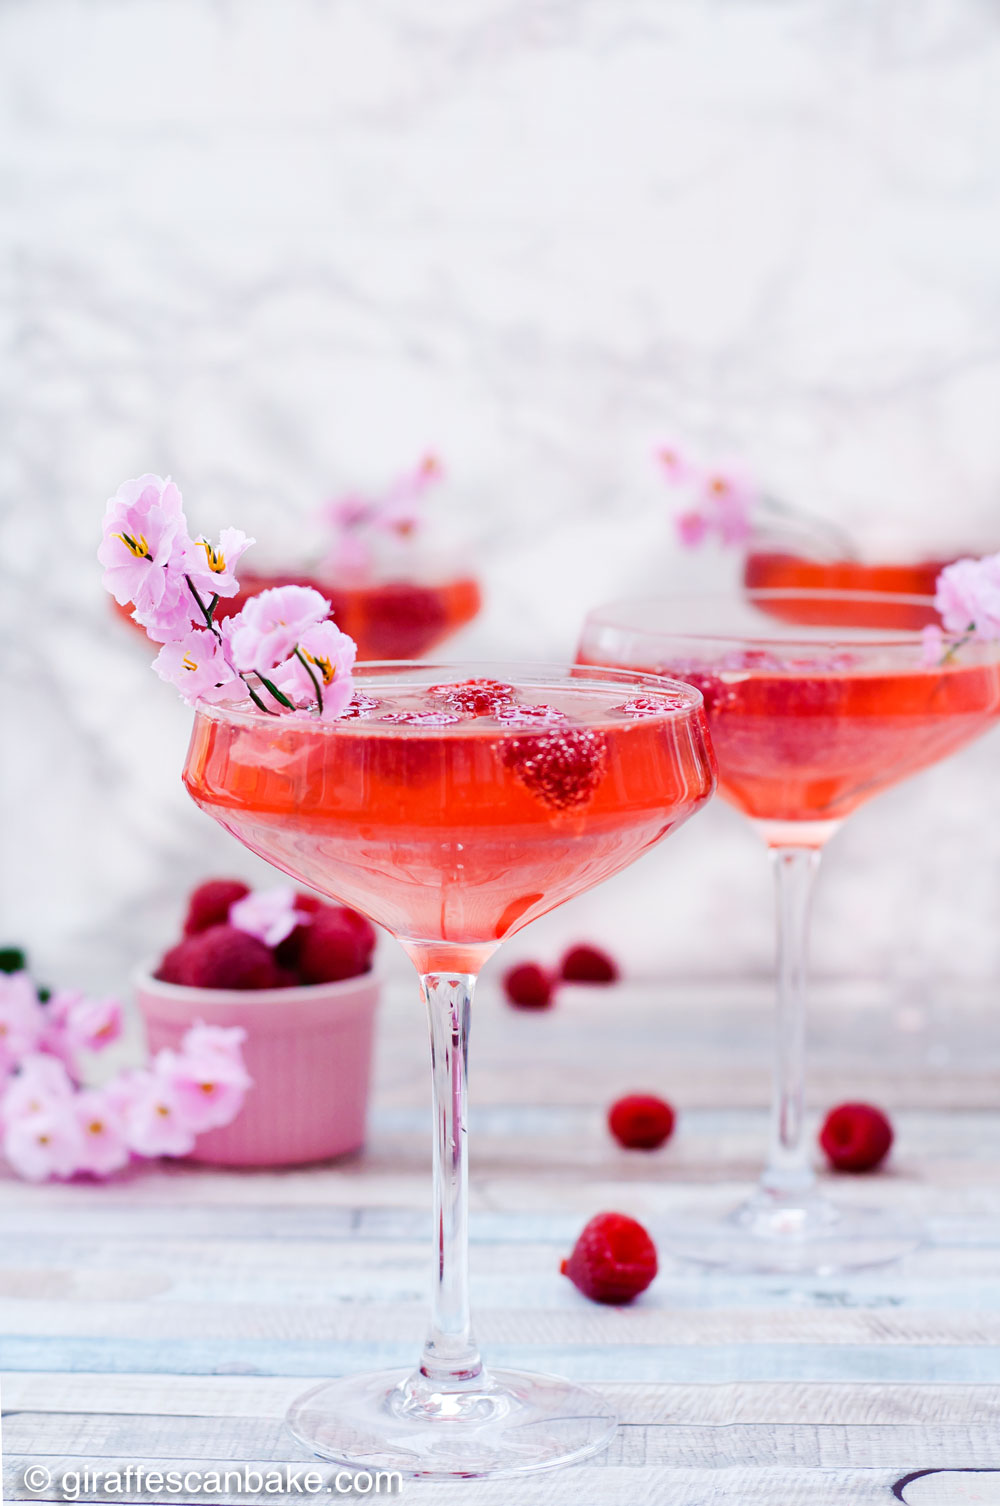 Peach vodka, fresh raspberry syrup and champagne are combined to make this gorgeous Mother’s Day Raspberry Peach Champagne Cocktail. Sweet, bubbly and full of fresh, fruity flavours, this is the perfect cocktail to serve at a Mother’s Day brunch or any special occasion. Don’t have peach vodka to hand? No problem, I have an easy substitute for you! So raise a glass and let’s call a toast the wonderful Mother figures in our lives.